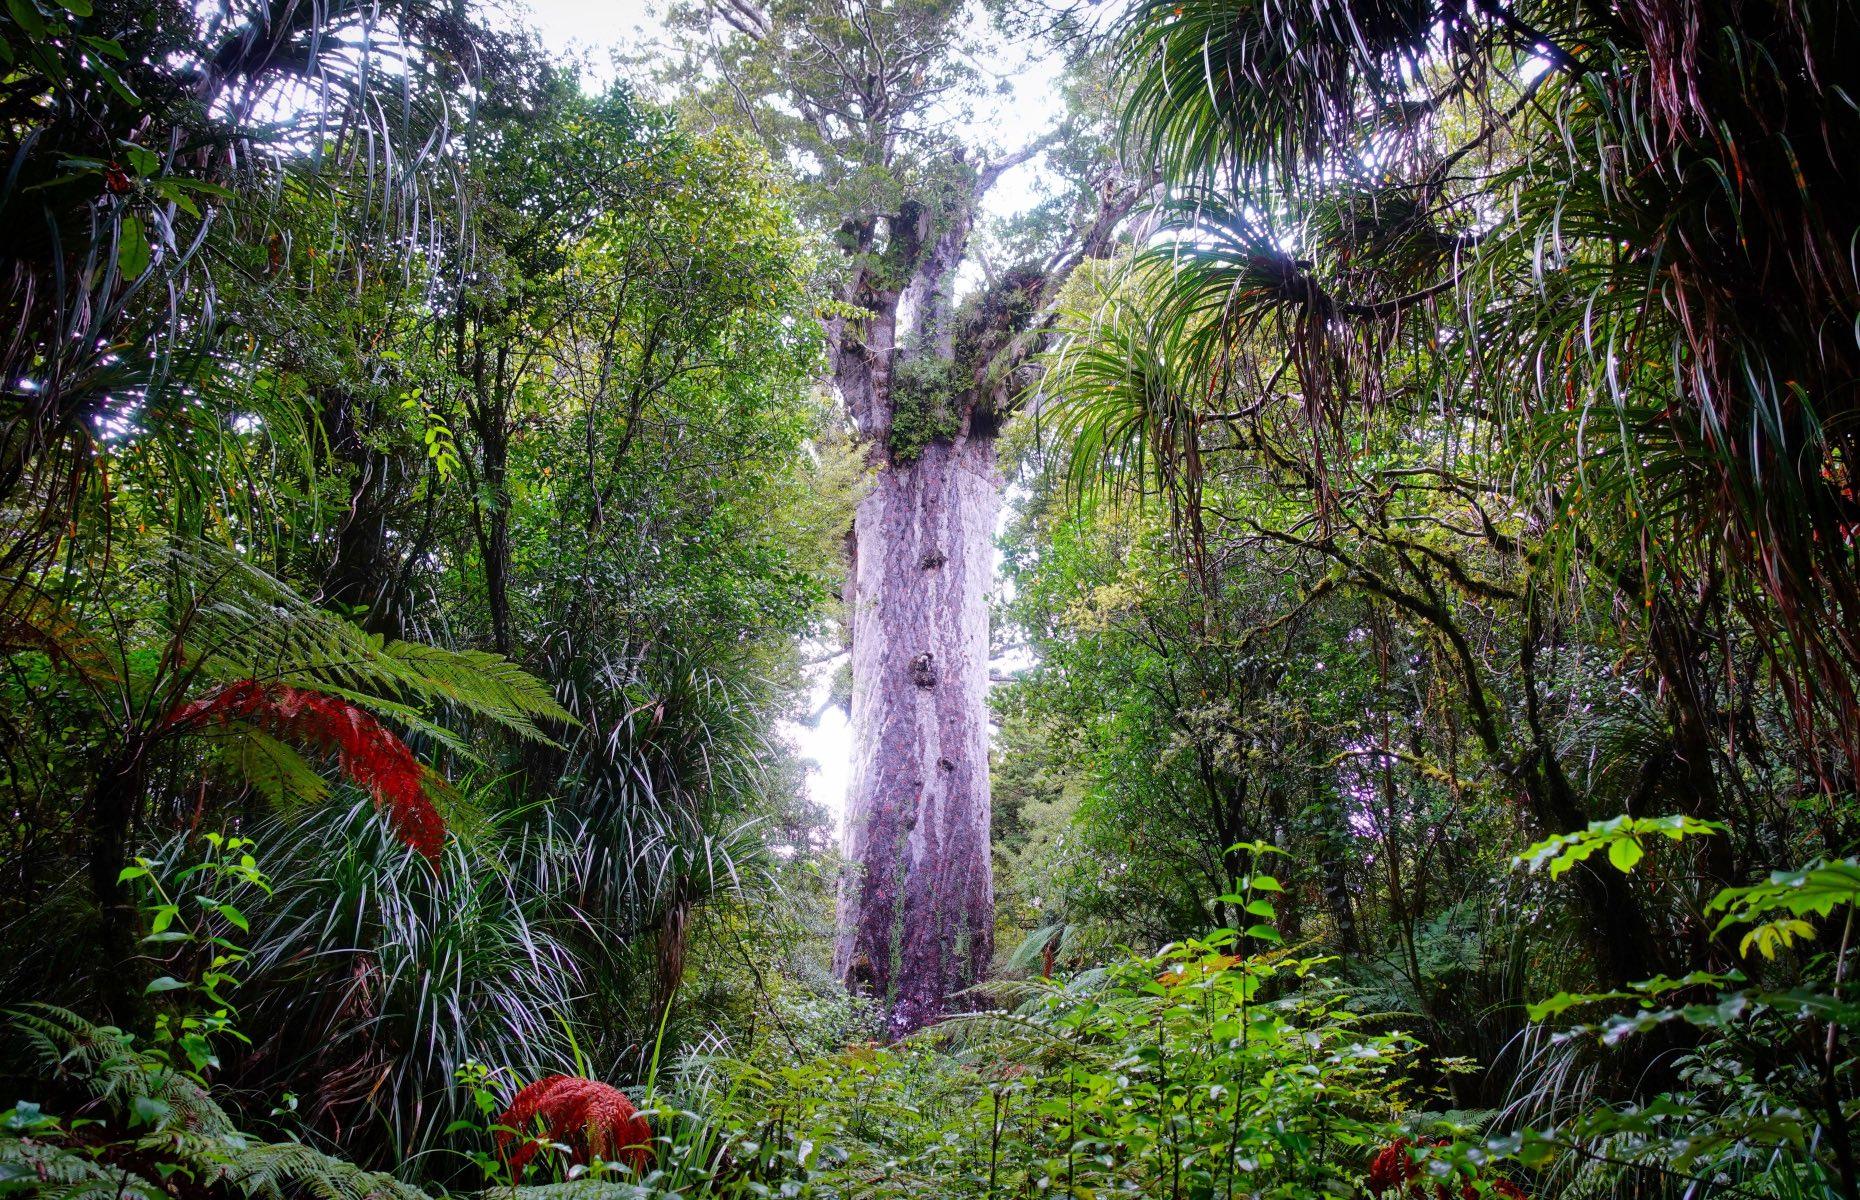 <p>This primordial world of towering ancient trees on the northern tip of New Zealand is the largest remaining tract of native forest in Northland. It's home to Tane Mahuta – the Lord of the Forest – a 2,000-year-old sacred kauri tree that measures 14 feet (4.4m) around its trunk and almost 59 feet (18m) up to its first branch. That's young compared to another giant kauri tree found here: Te Matua Ngahere, meaning Father of the Forest, is estimated to be between 2,500 and 3,000 years old. </p>